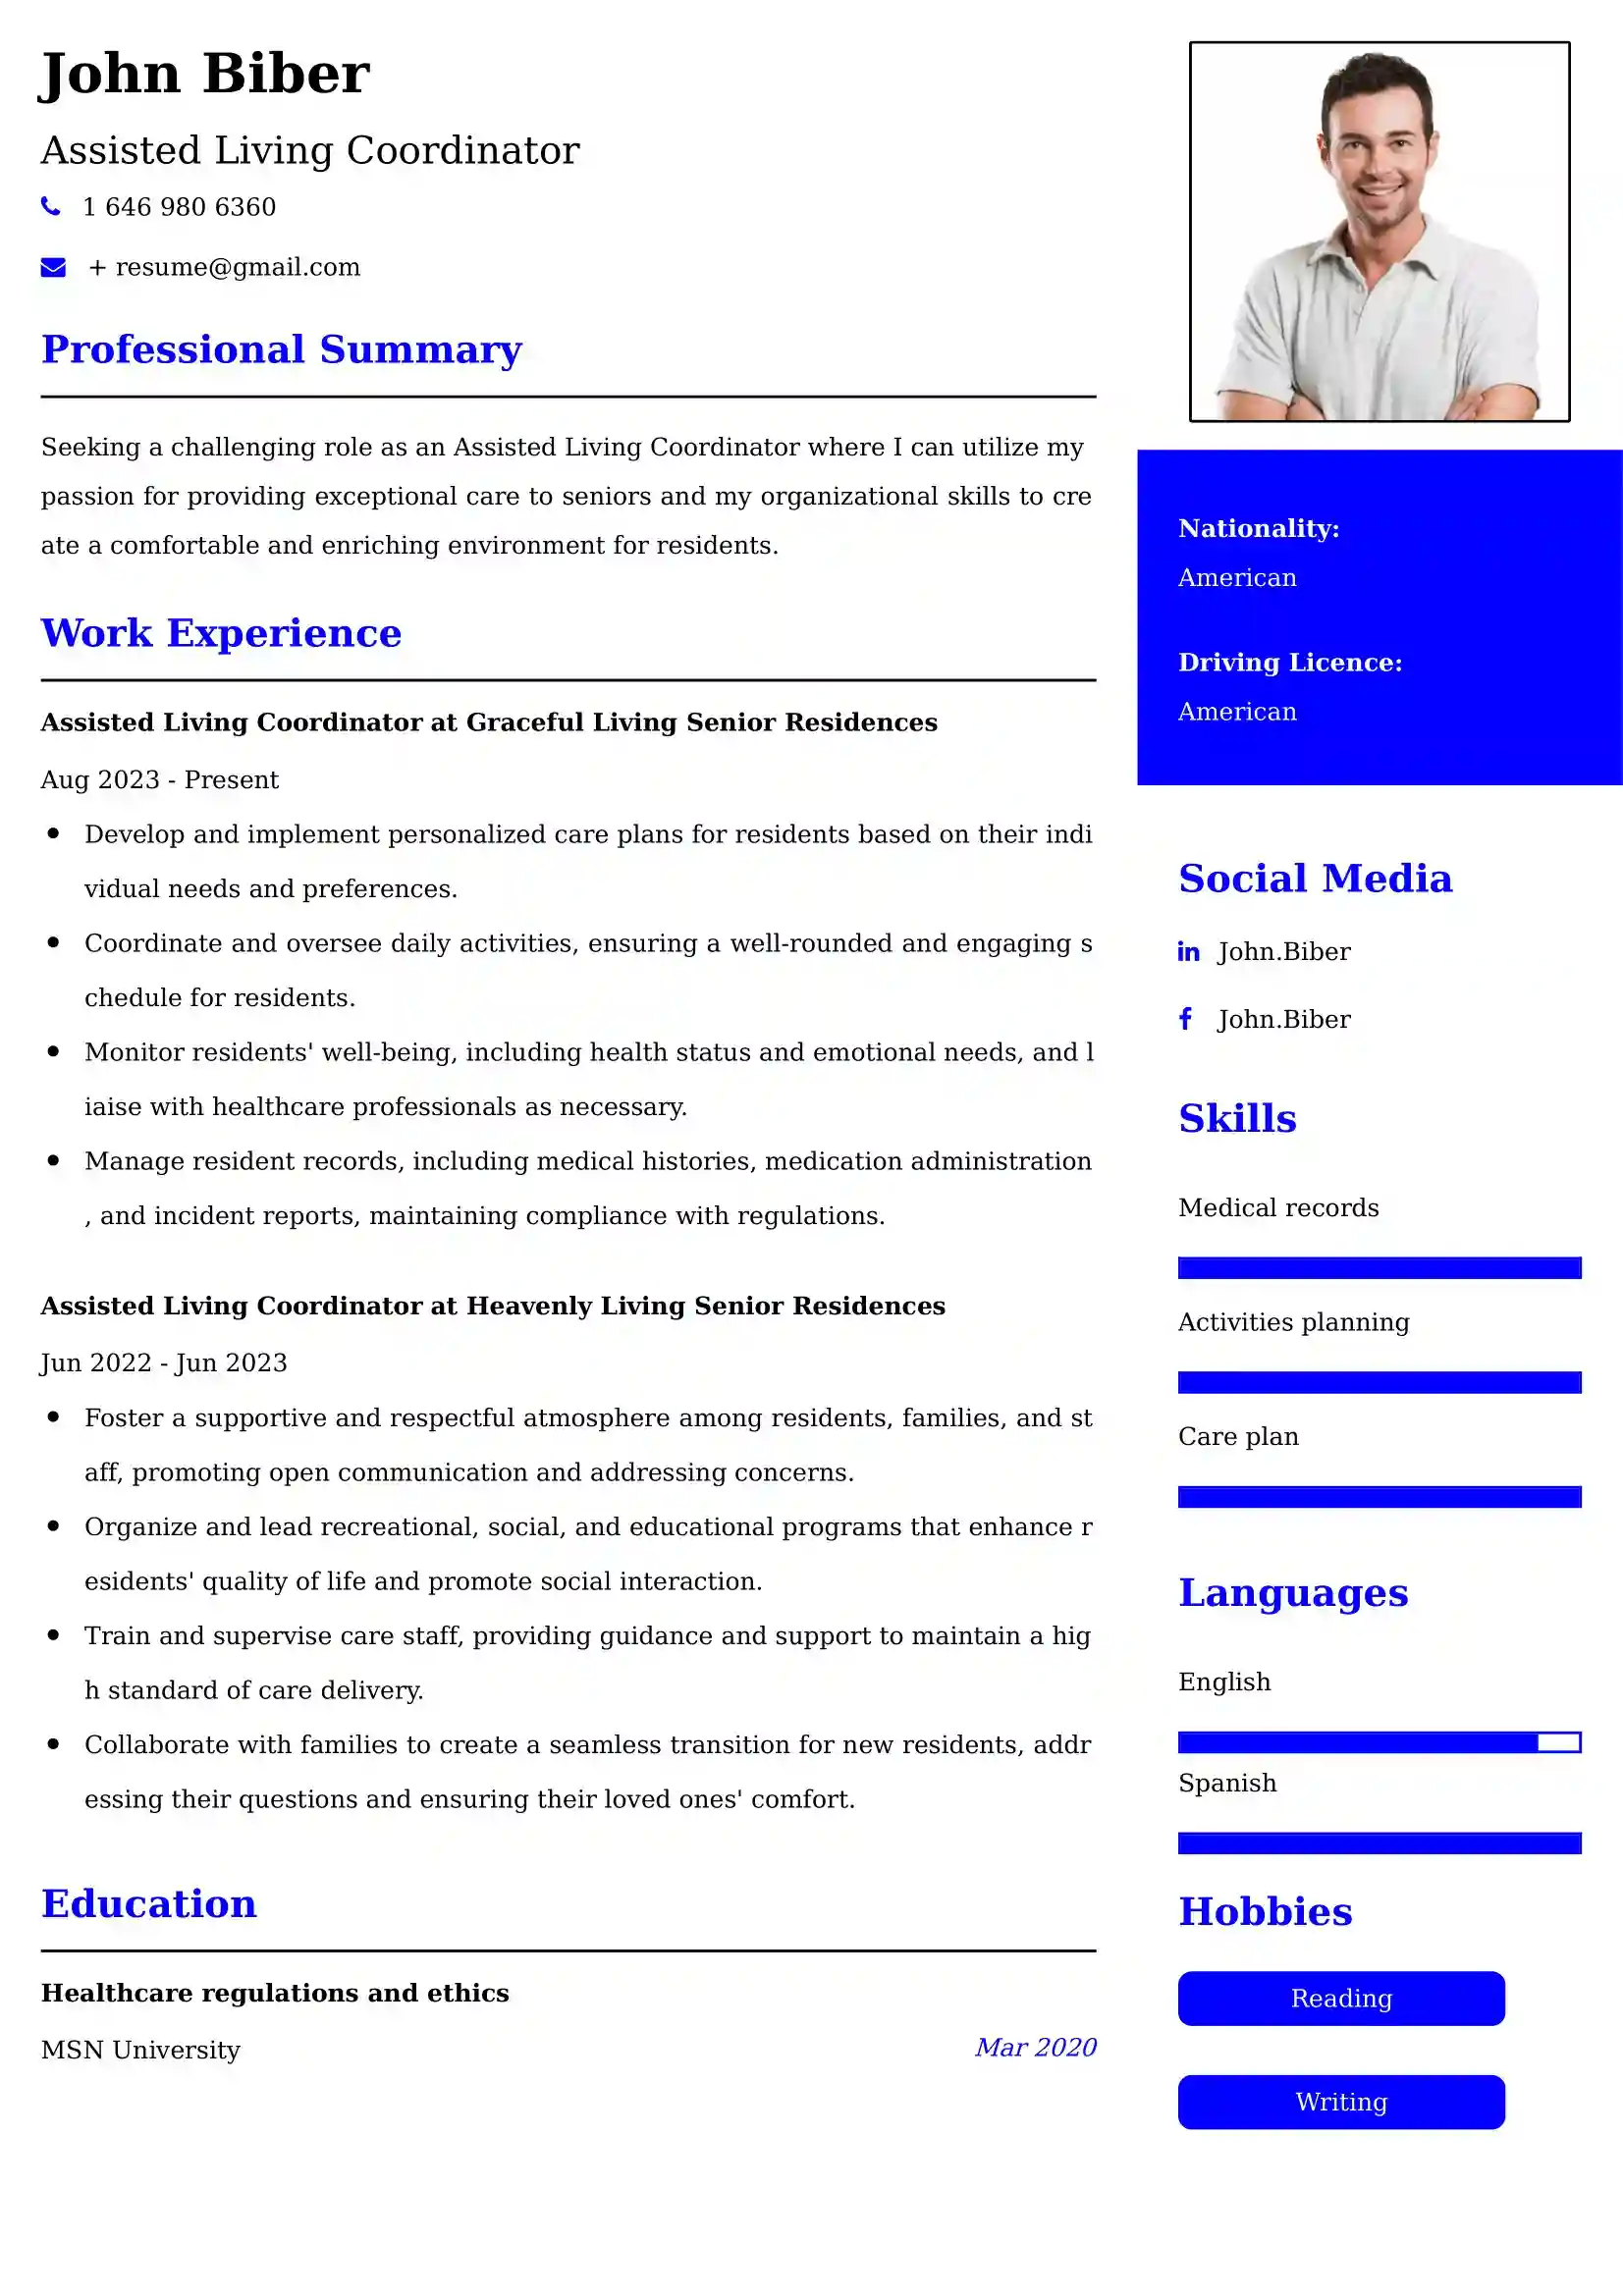 Assisted Living Coordinator Resume Examples - Brazilian Format, Latest Template